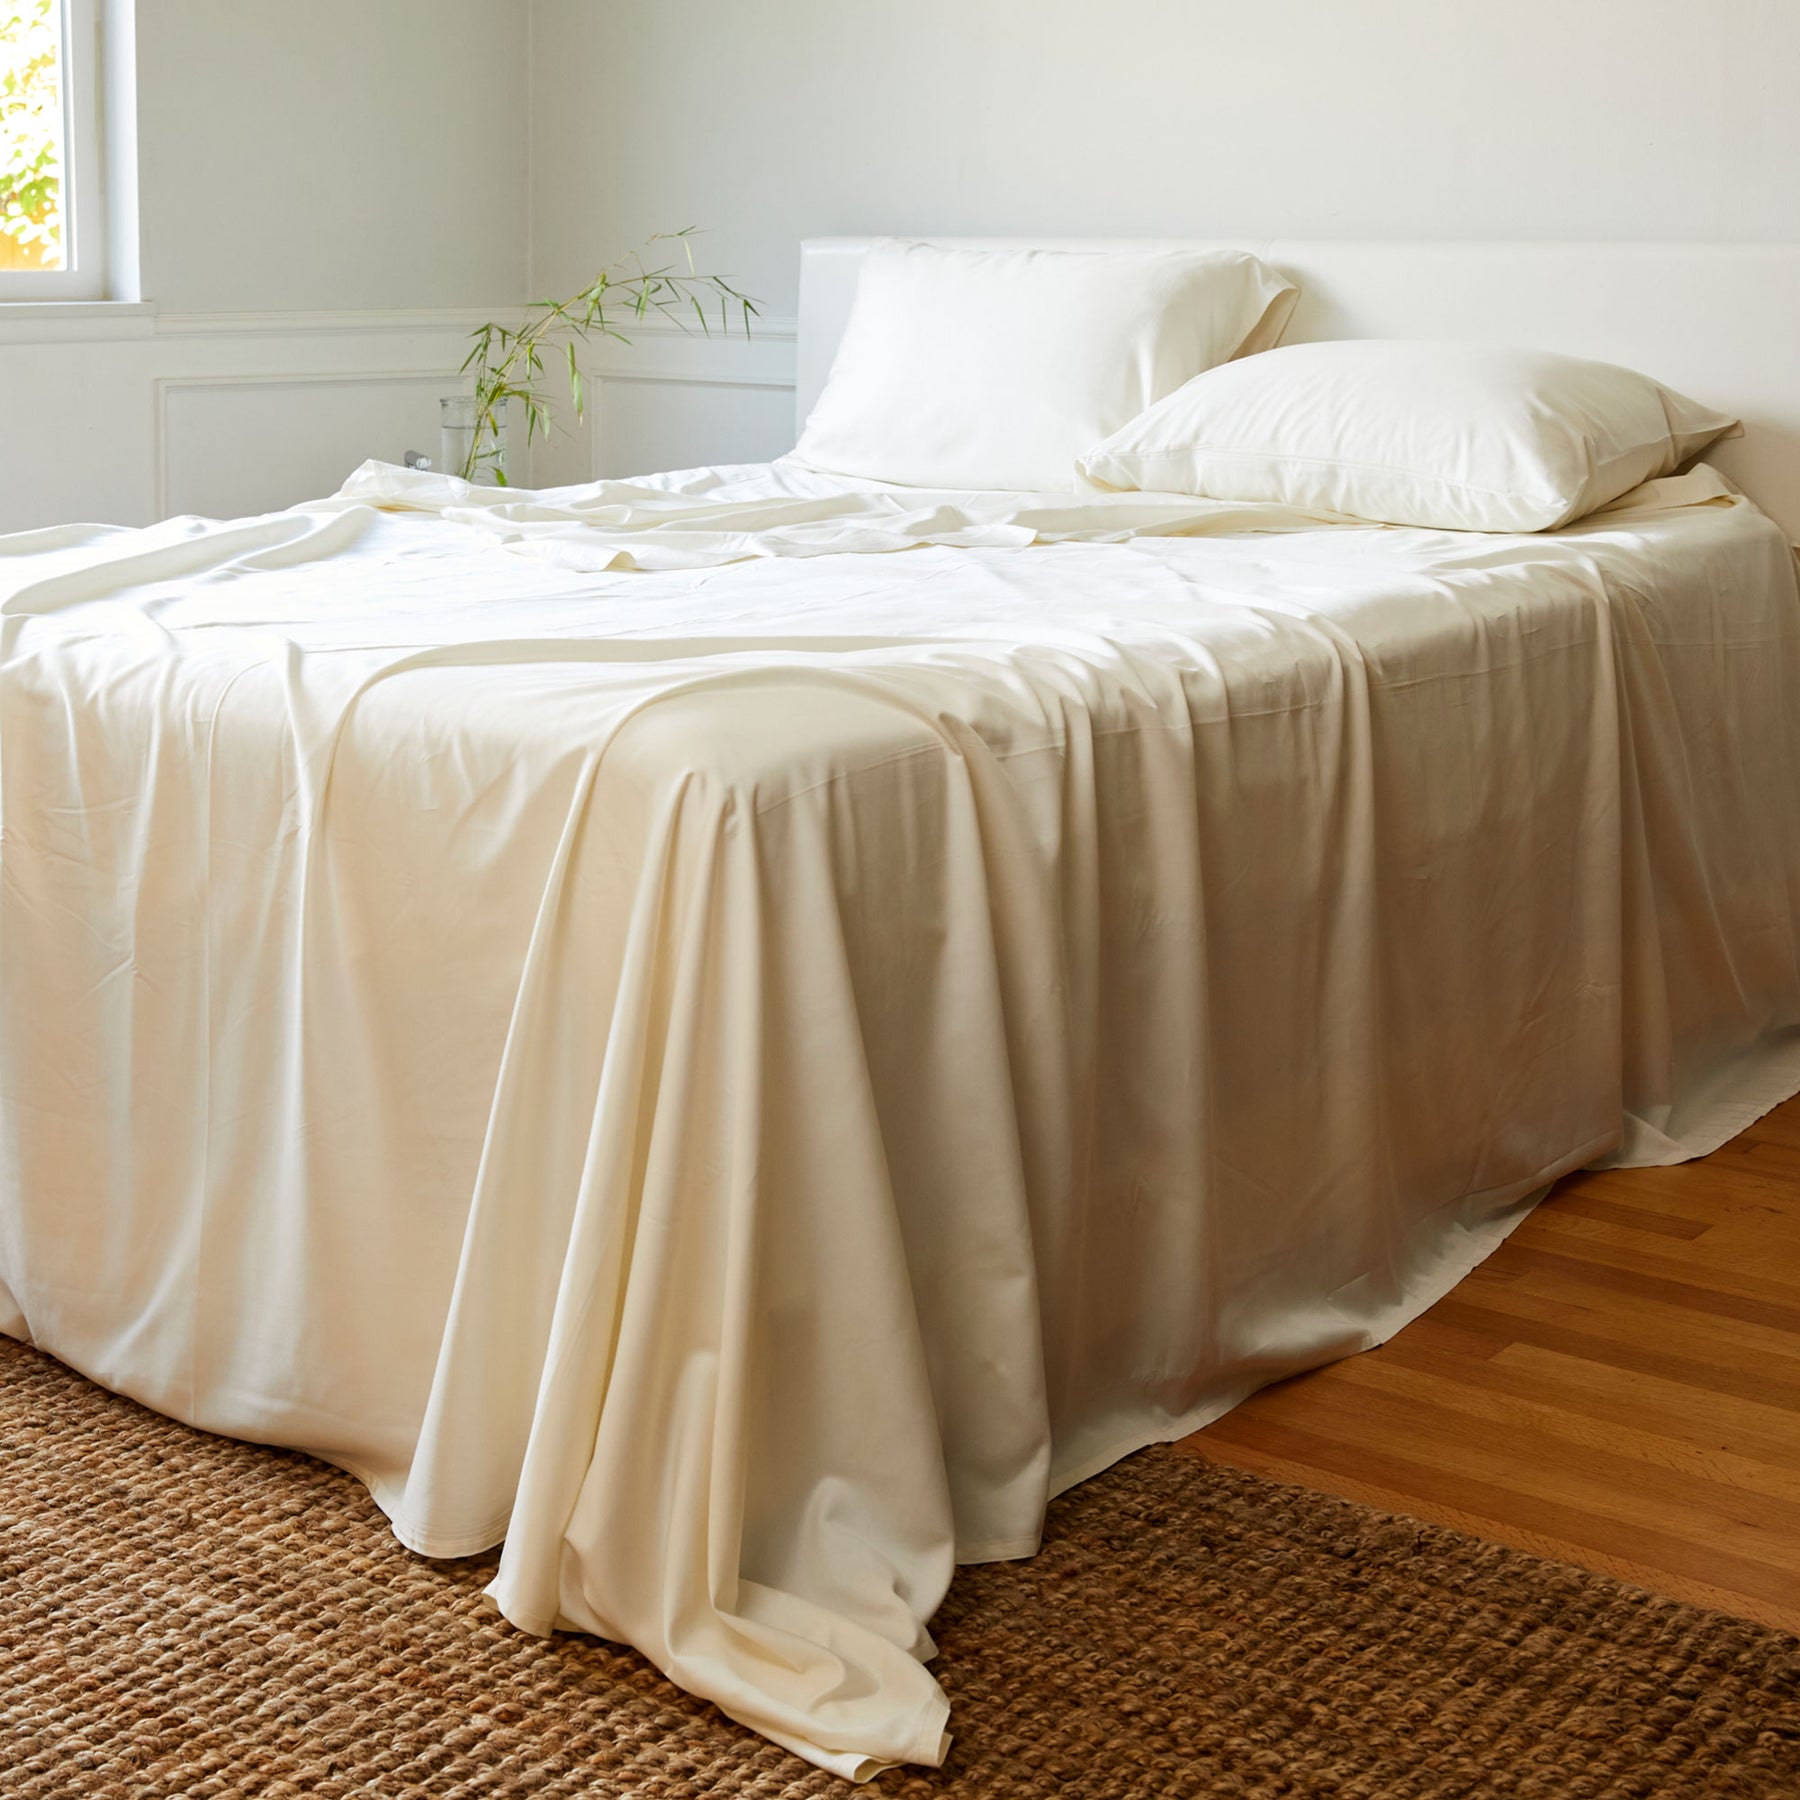 BedVoyage Luxury 100% Viscose from Bamboo Bed Sheet Set | Natural Linens